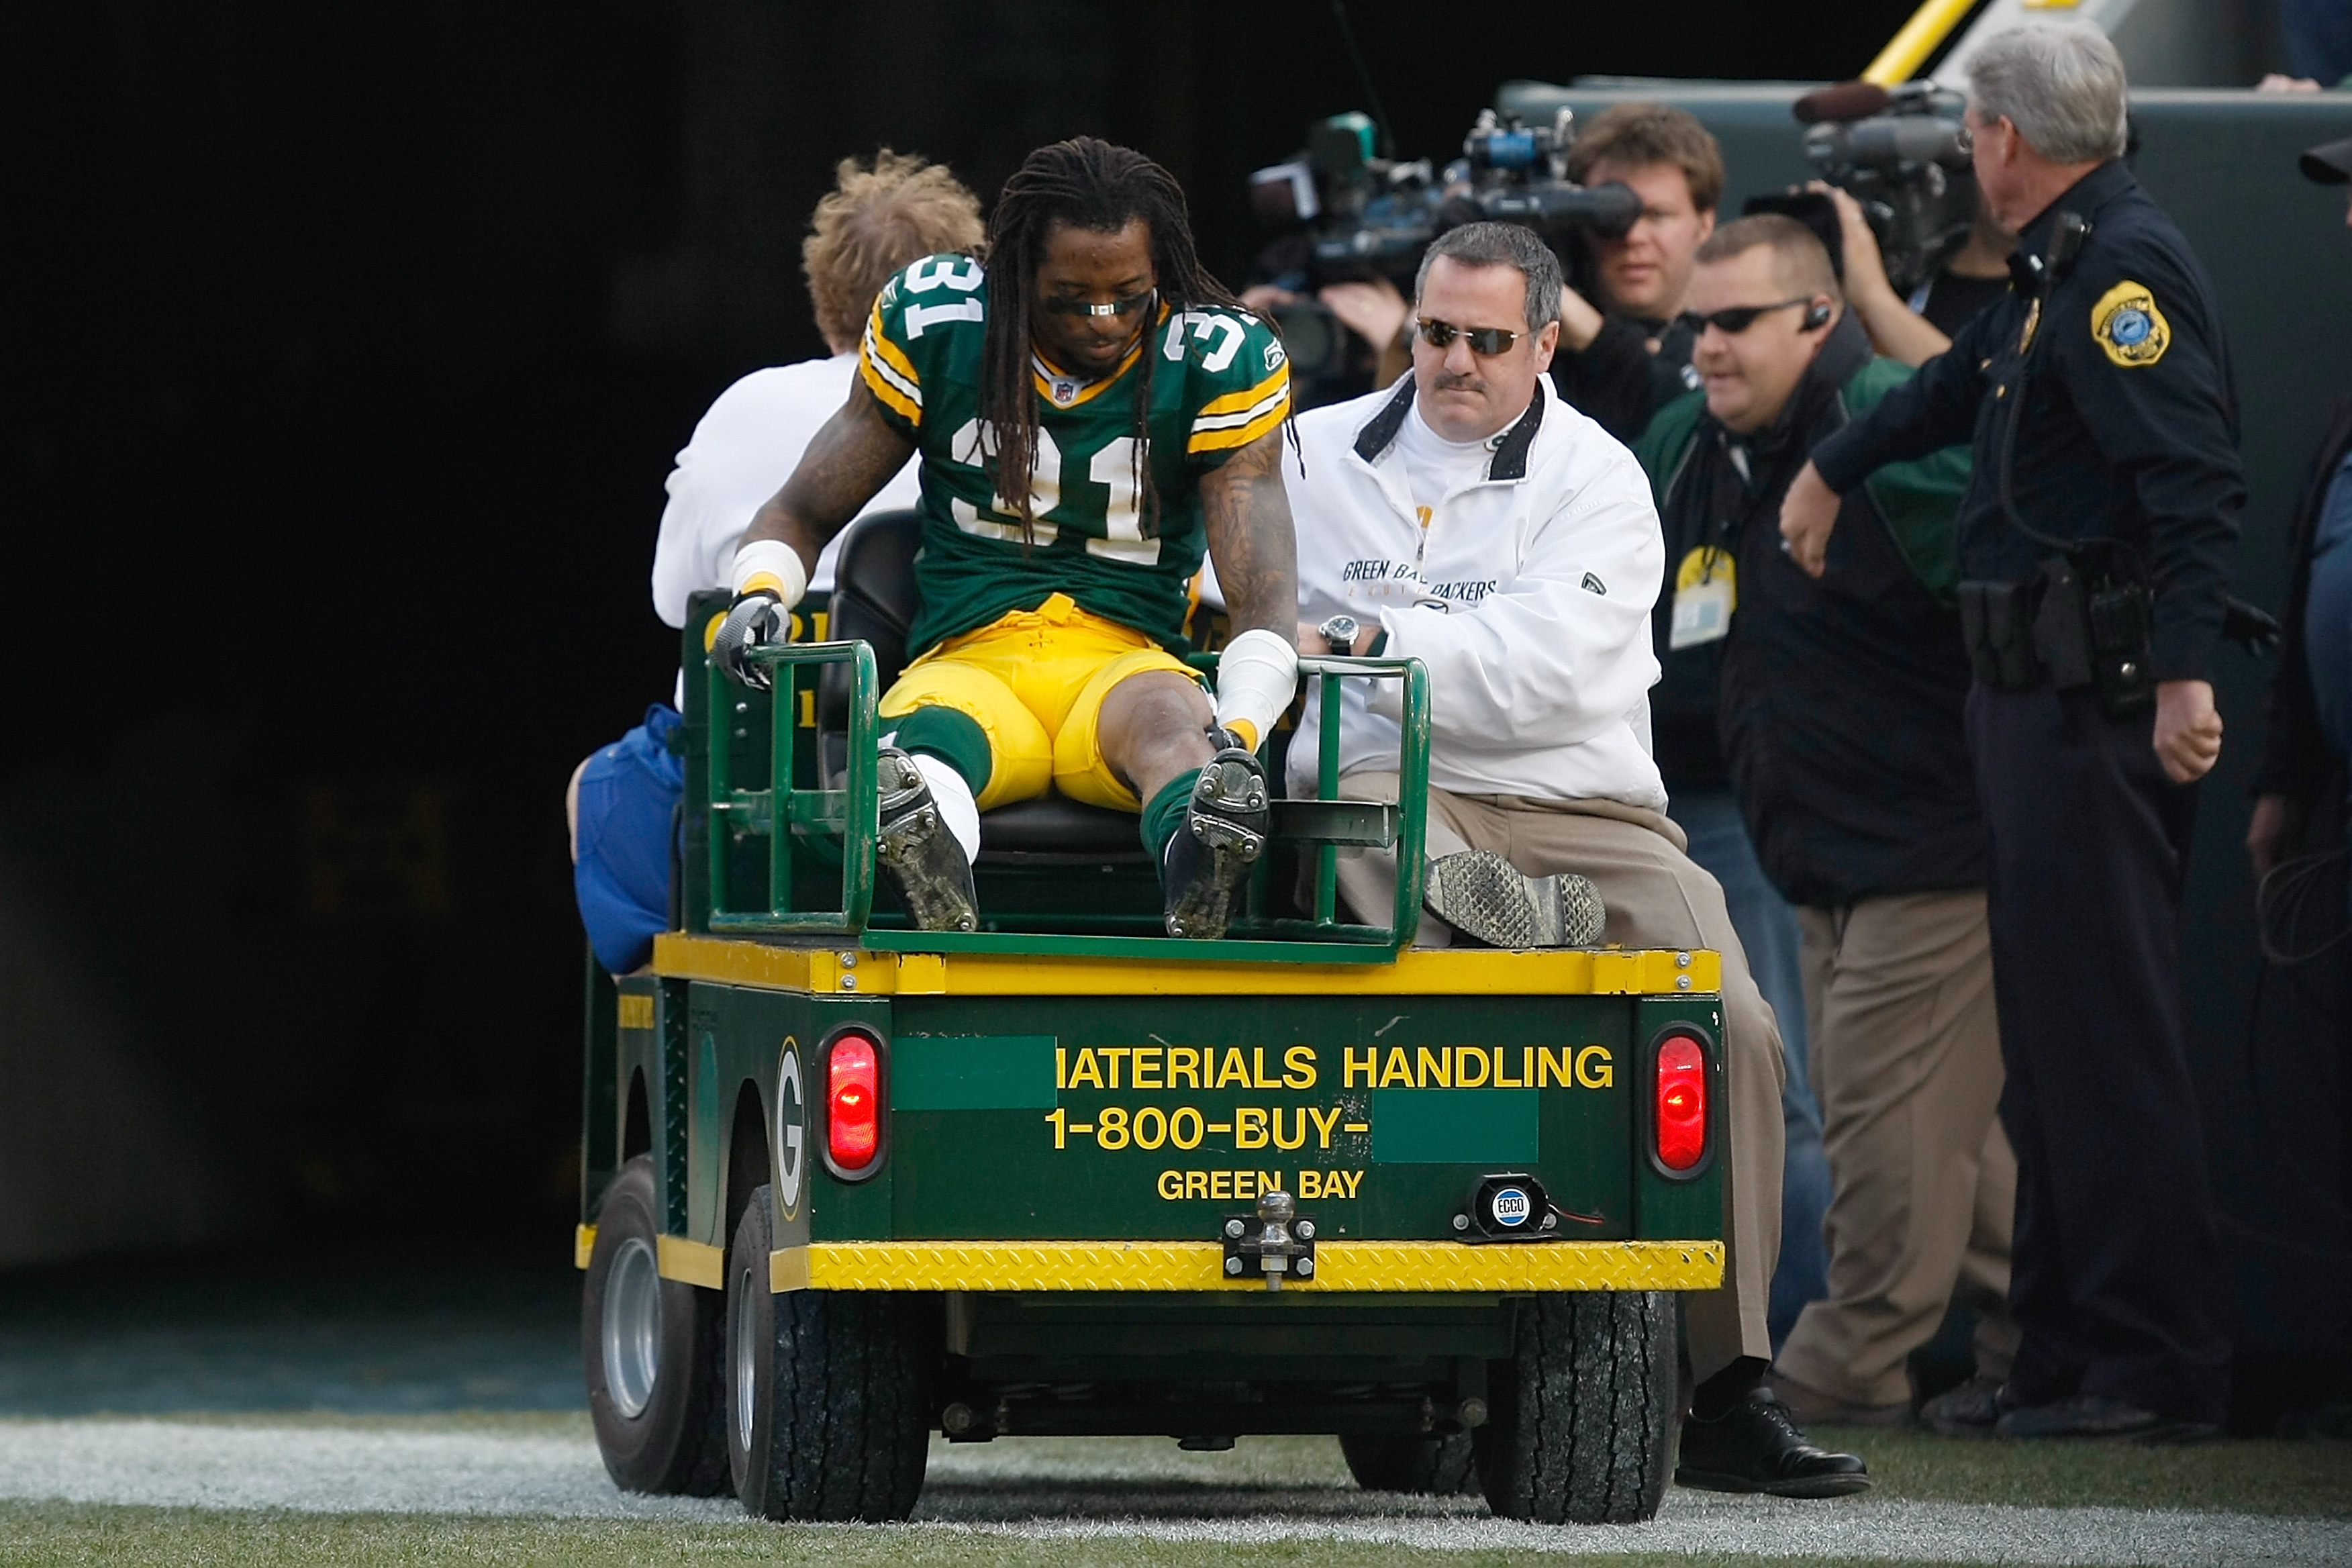 GREEN BAY, WI - NOVEMBER 22: Defensive back Al Harris #31 of the Green Bay Packers is taken off the field on a cart after an injury against the San Francisco 49ers at Lambeau Field on November 22, 2009 in Green Bay, Wisconsin. The Packers defeated the 49e